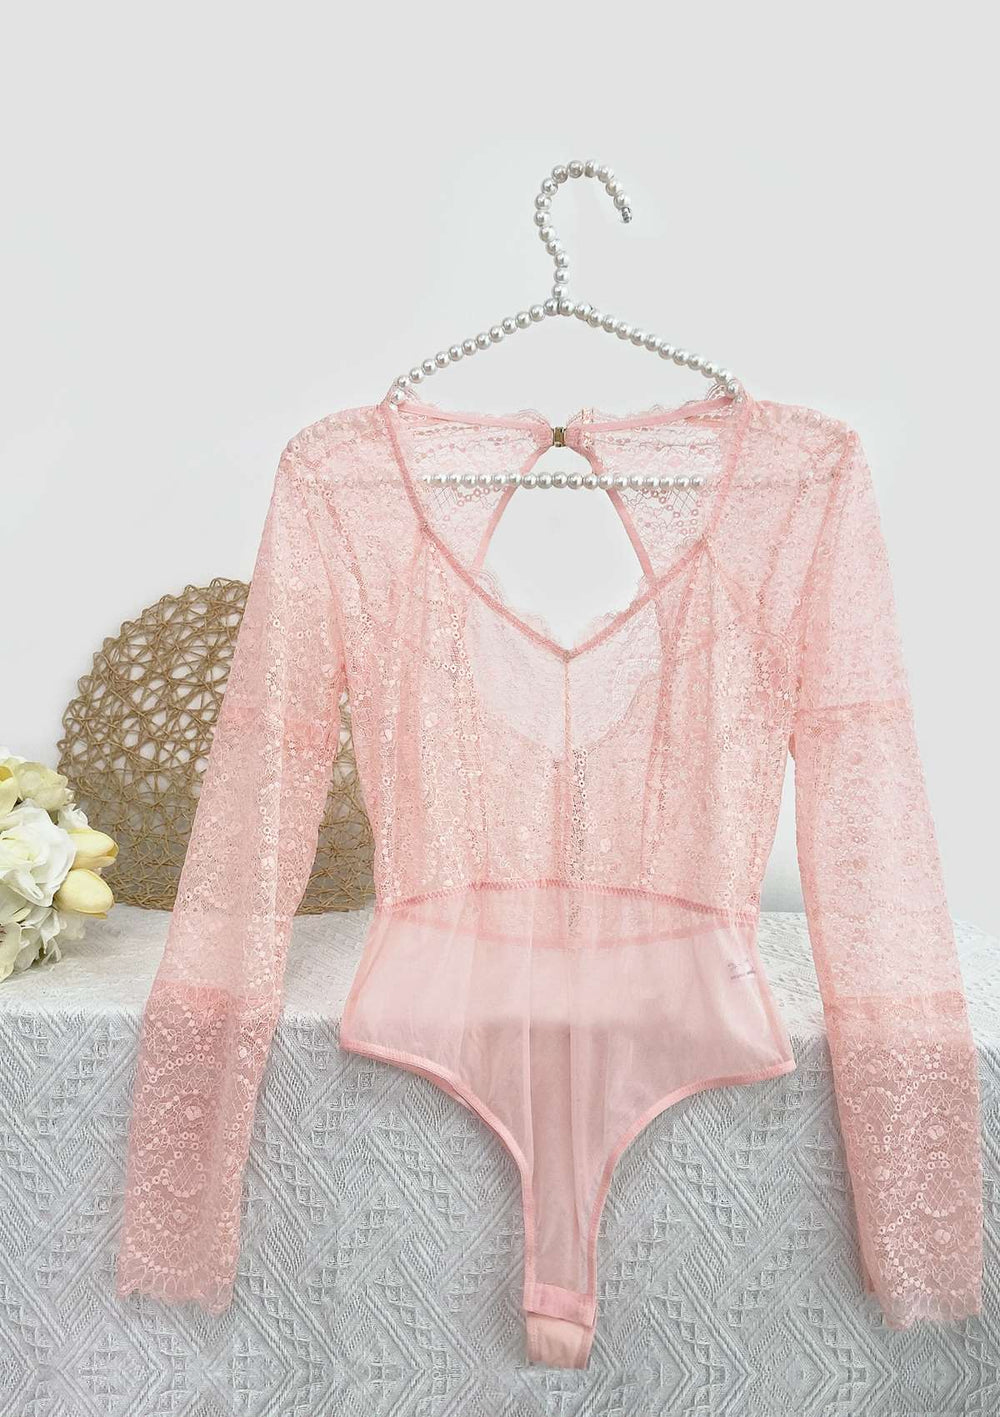 HSIA Stylish Long Sleeve Lace Teddy: Sexy and Sensual Lingerie